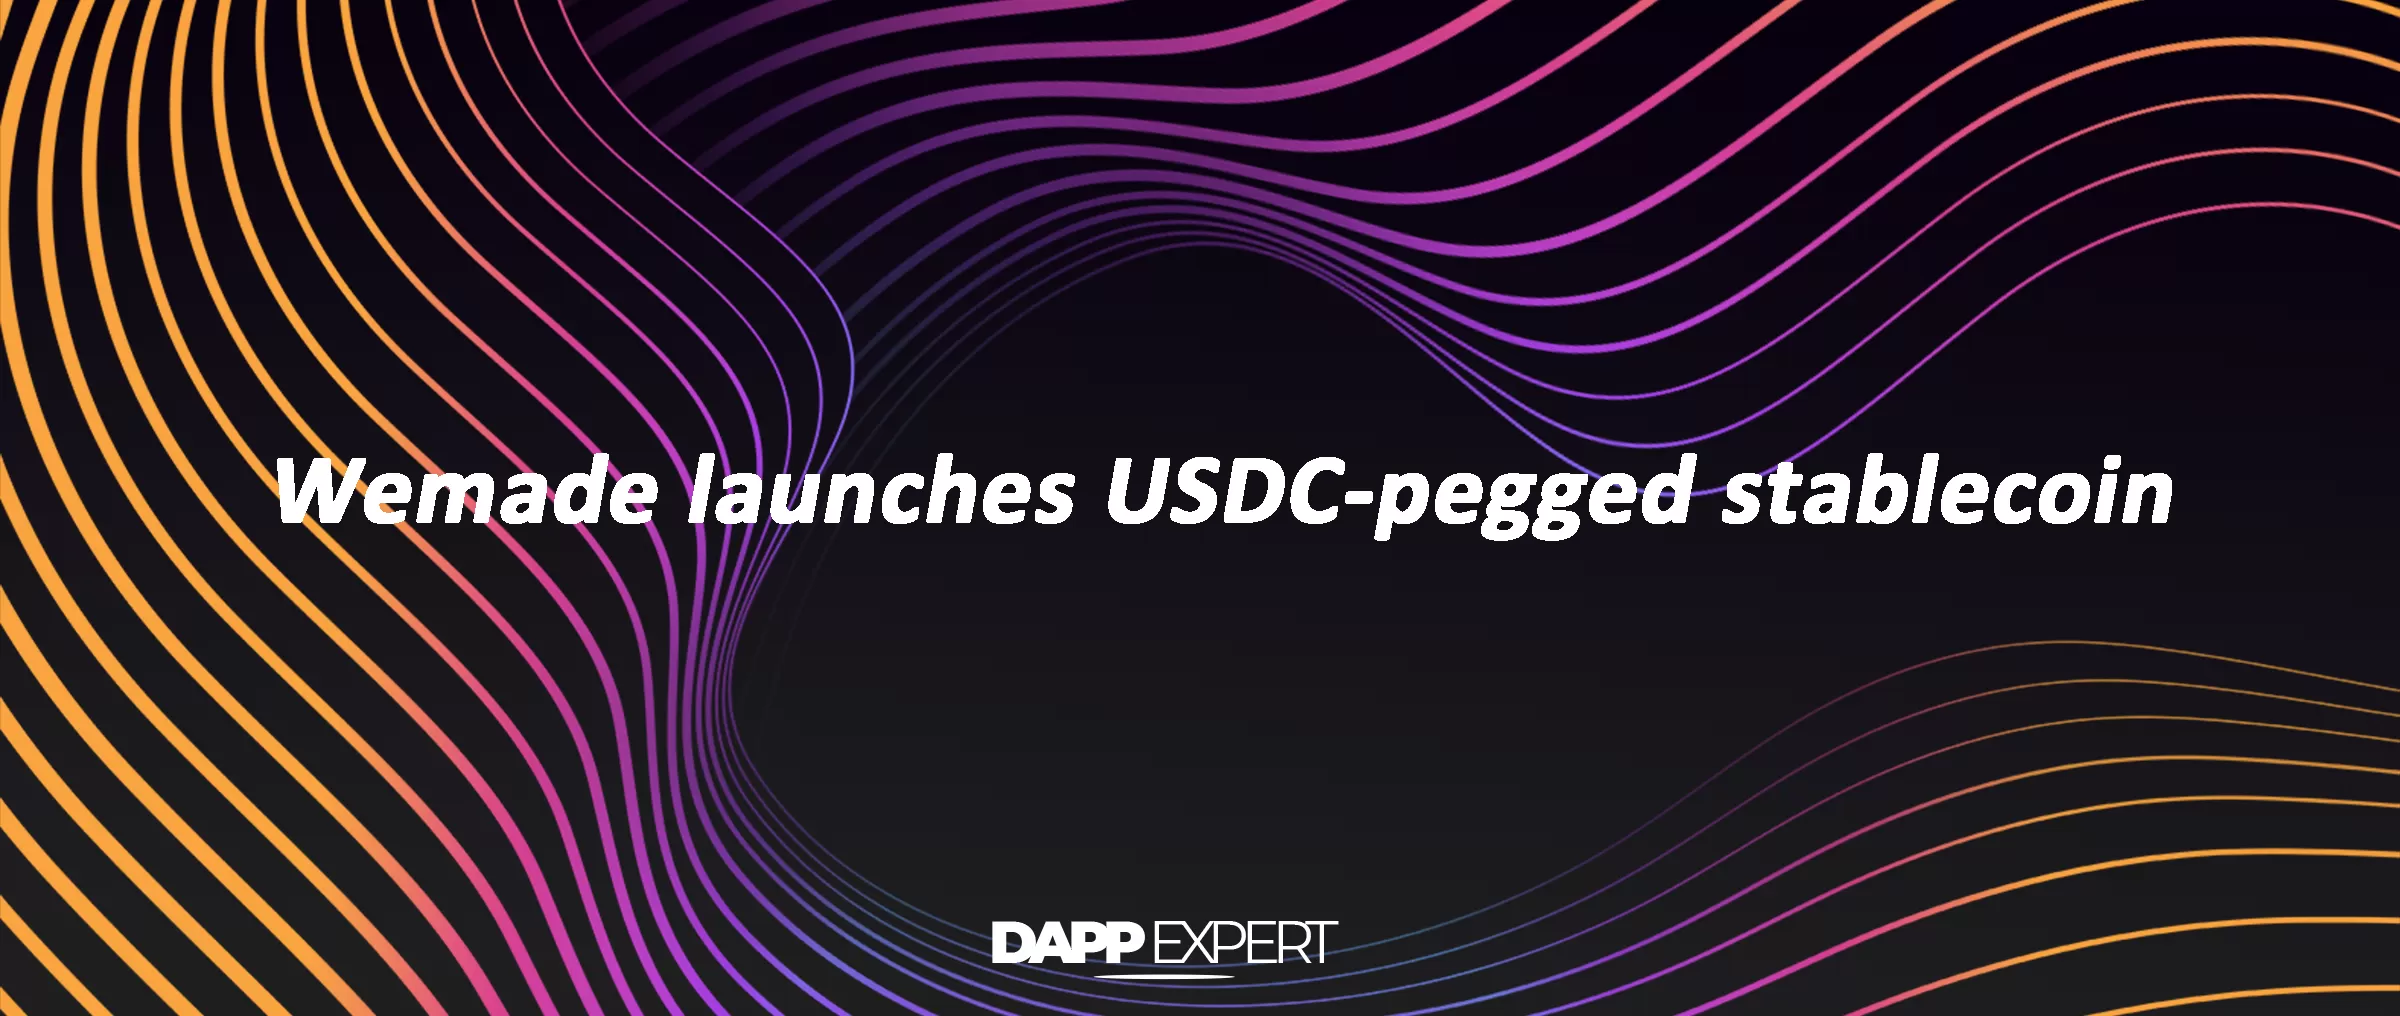 Wemade launches USDC-pegged stablecoin